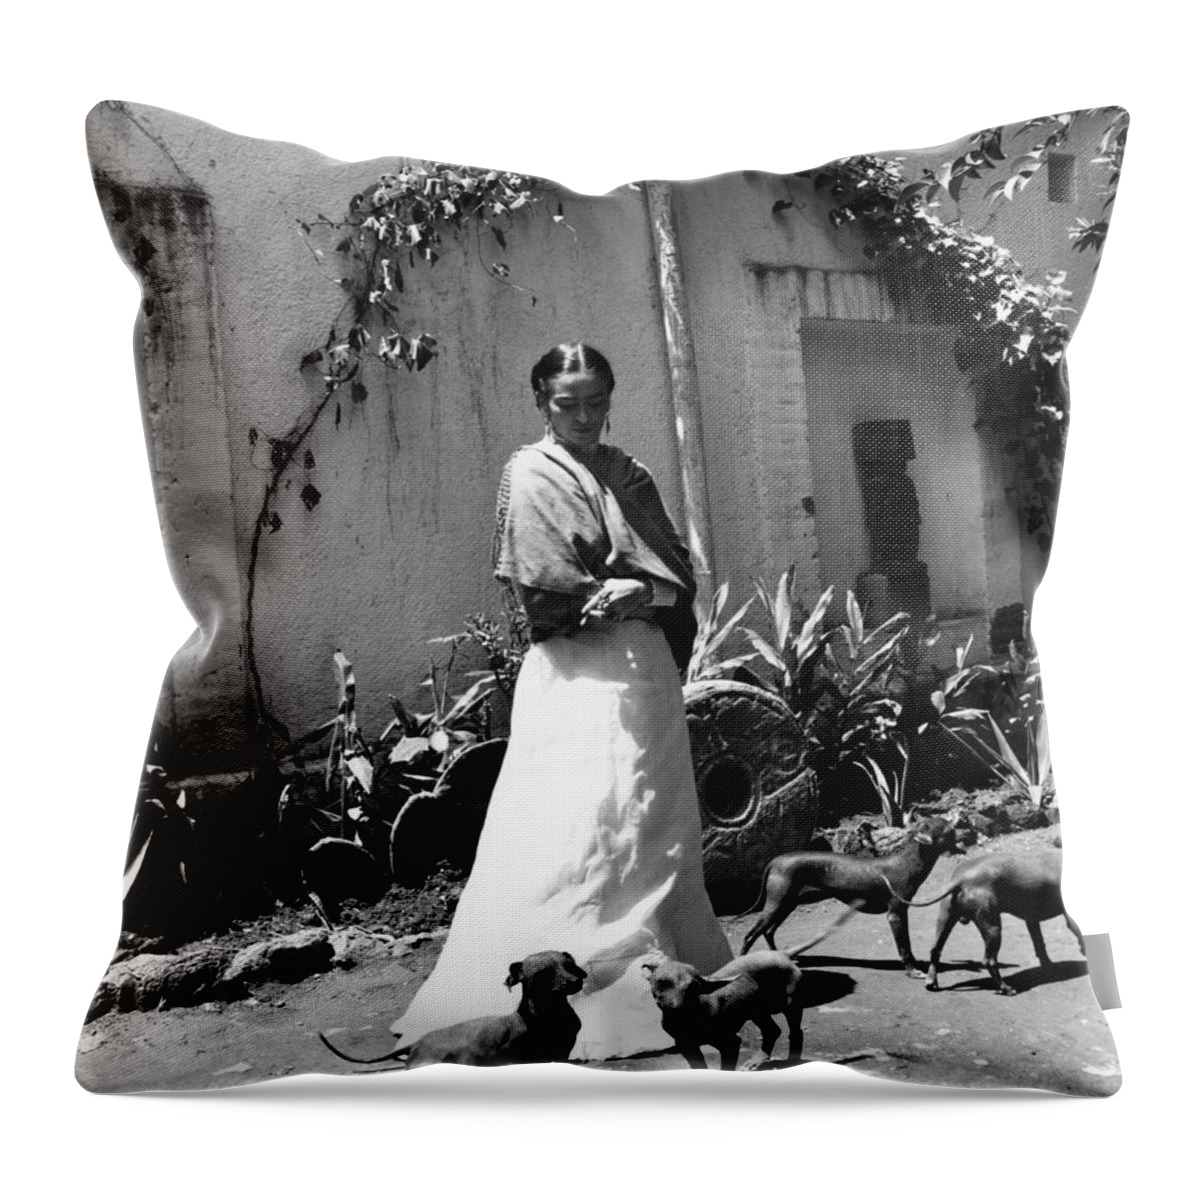 Art Throw Pillow featuring the photograph Frida Kahlo by Gisele Freund